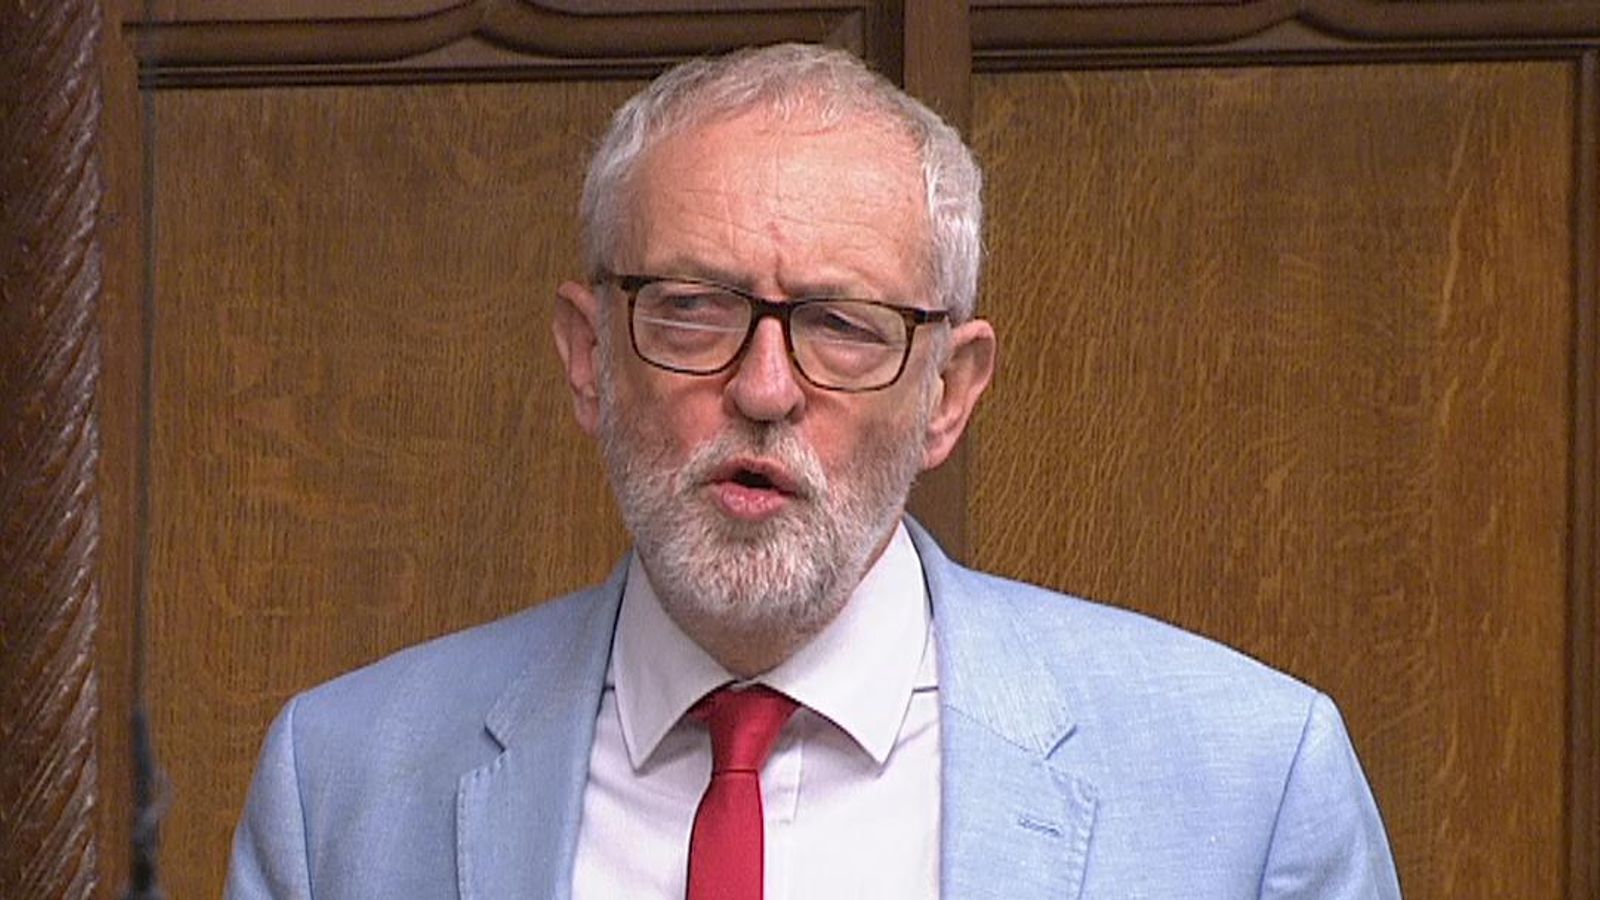 'Political cowardice': Jeremy Corbyn hits out at Labour position on migrant barges